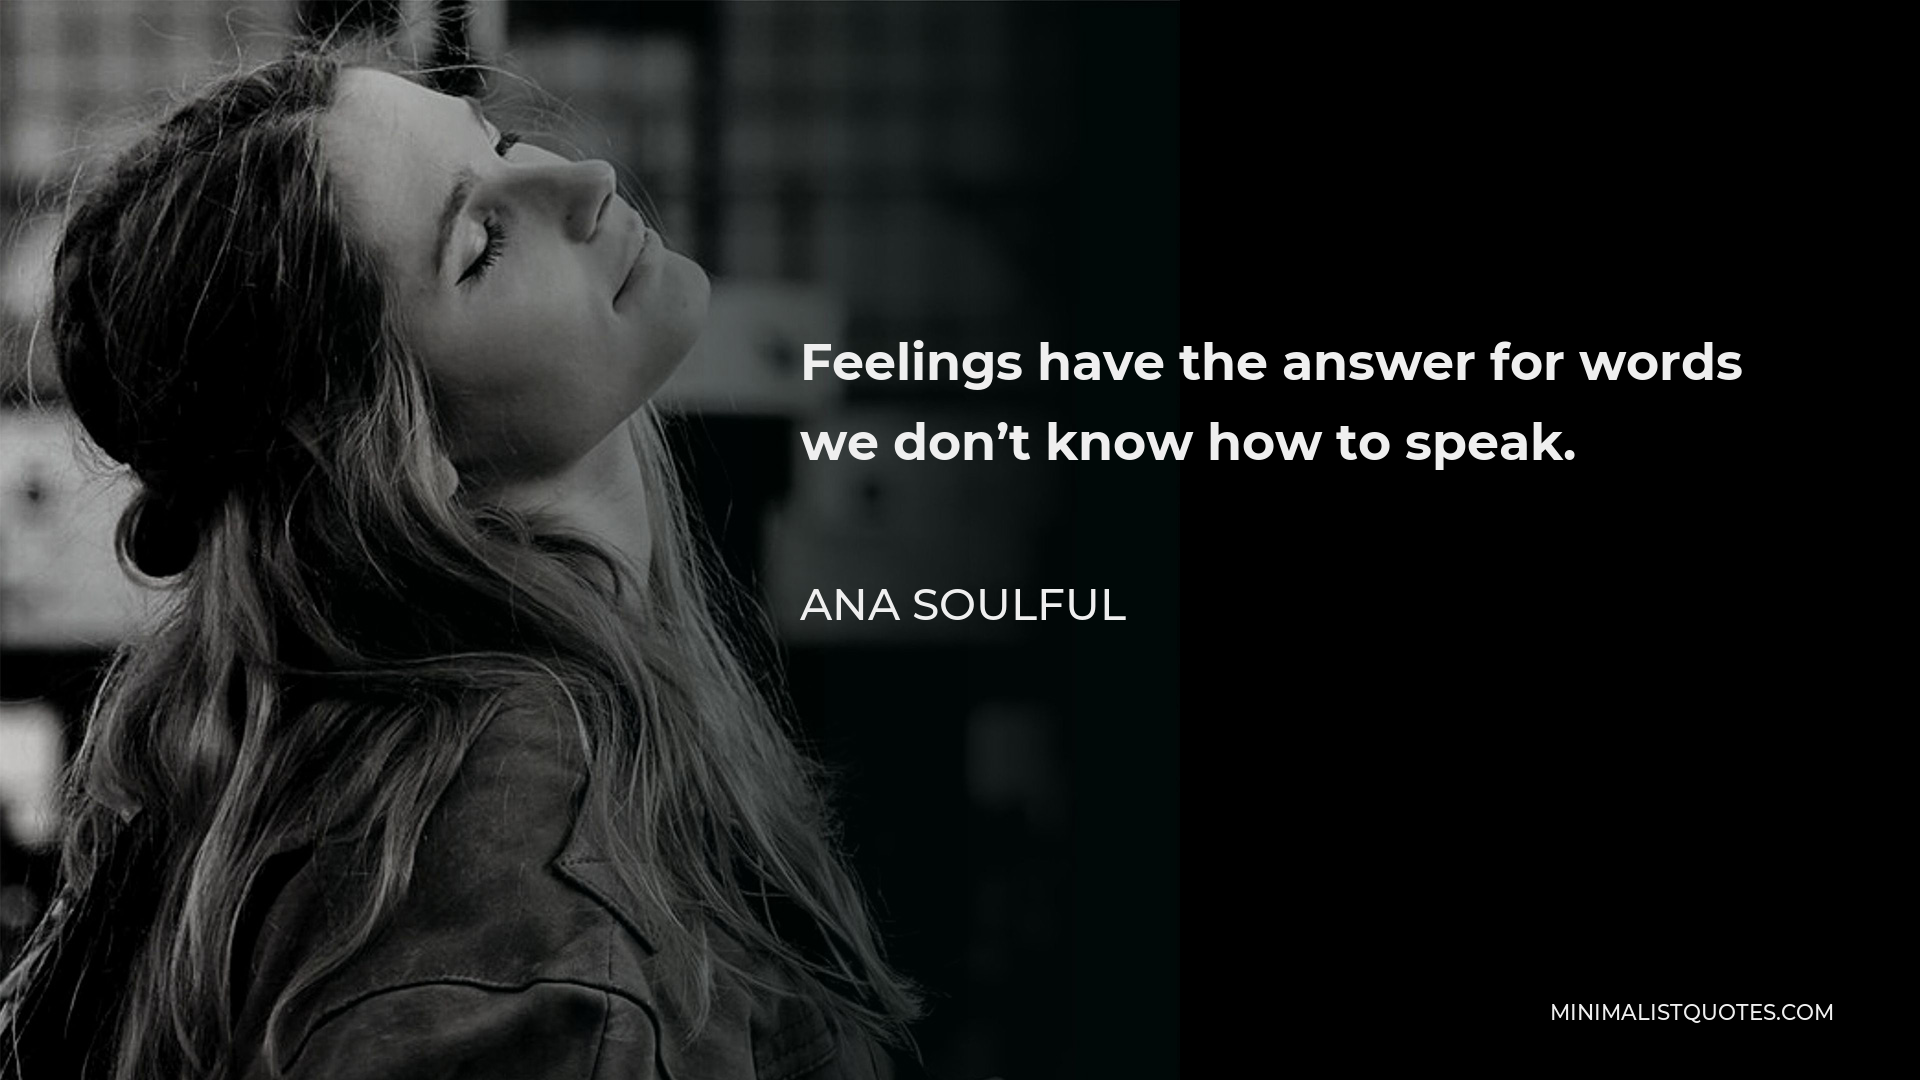 Ana Soulful Quote - Feelings have the answer for words we don’t know how to speak.